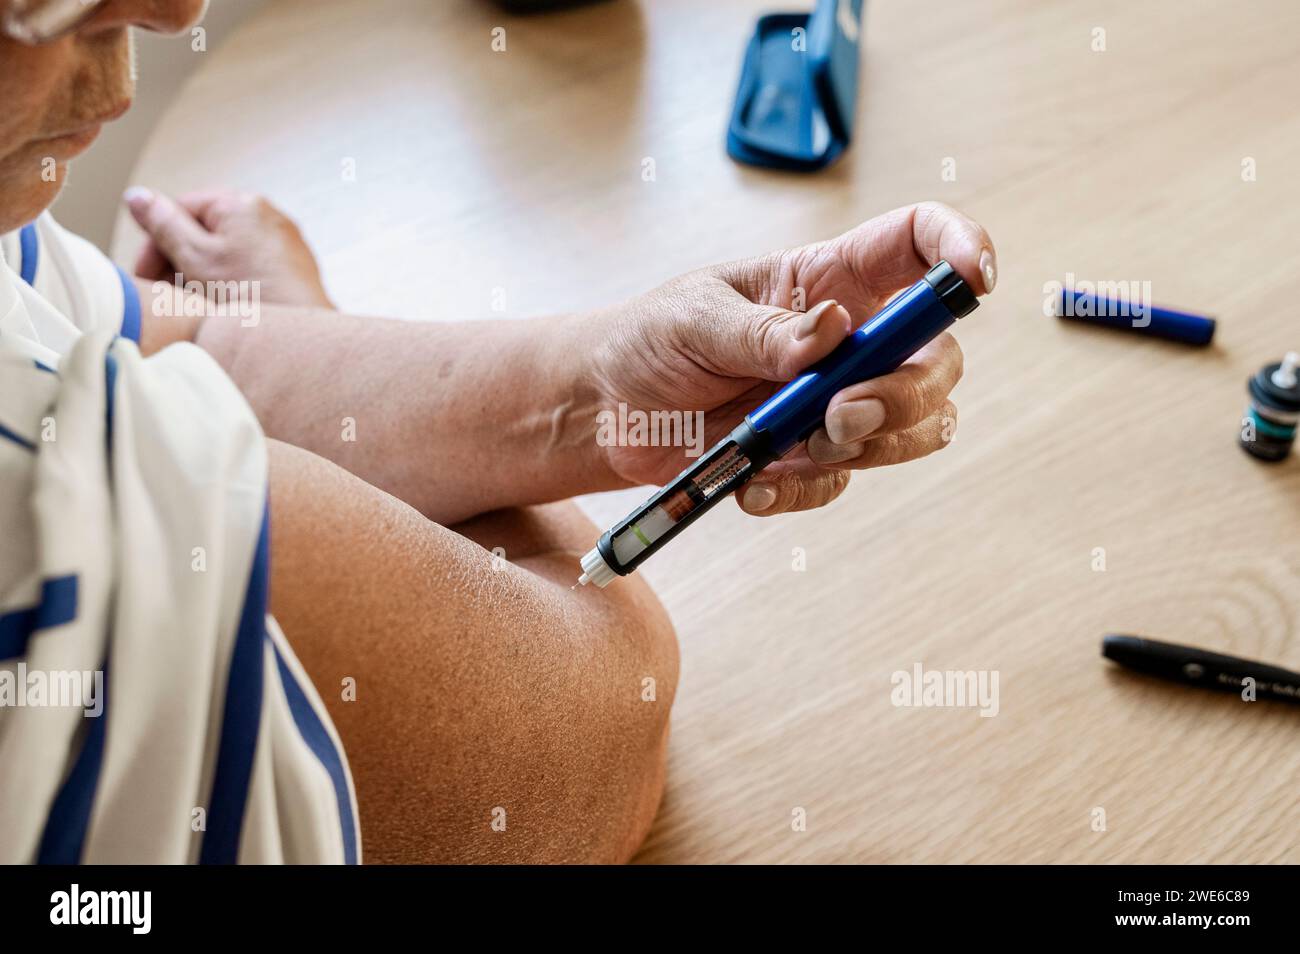 Senior woman injecting insulin at home Stock Photo